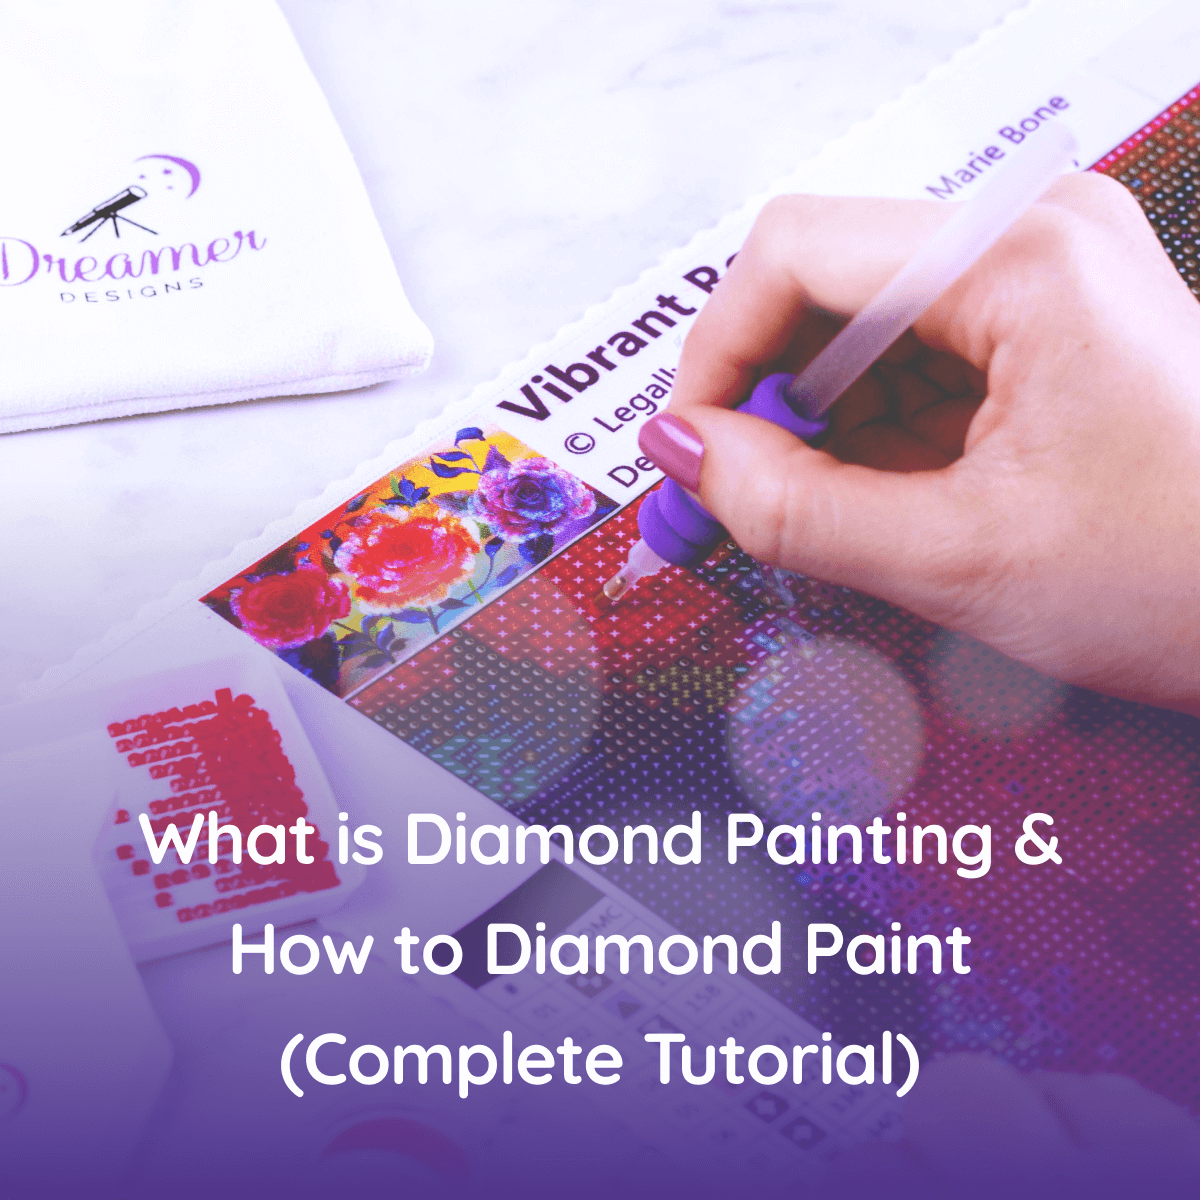 What do you use? : r/diamondpainting